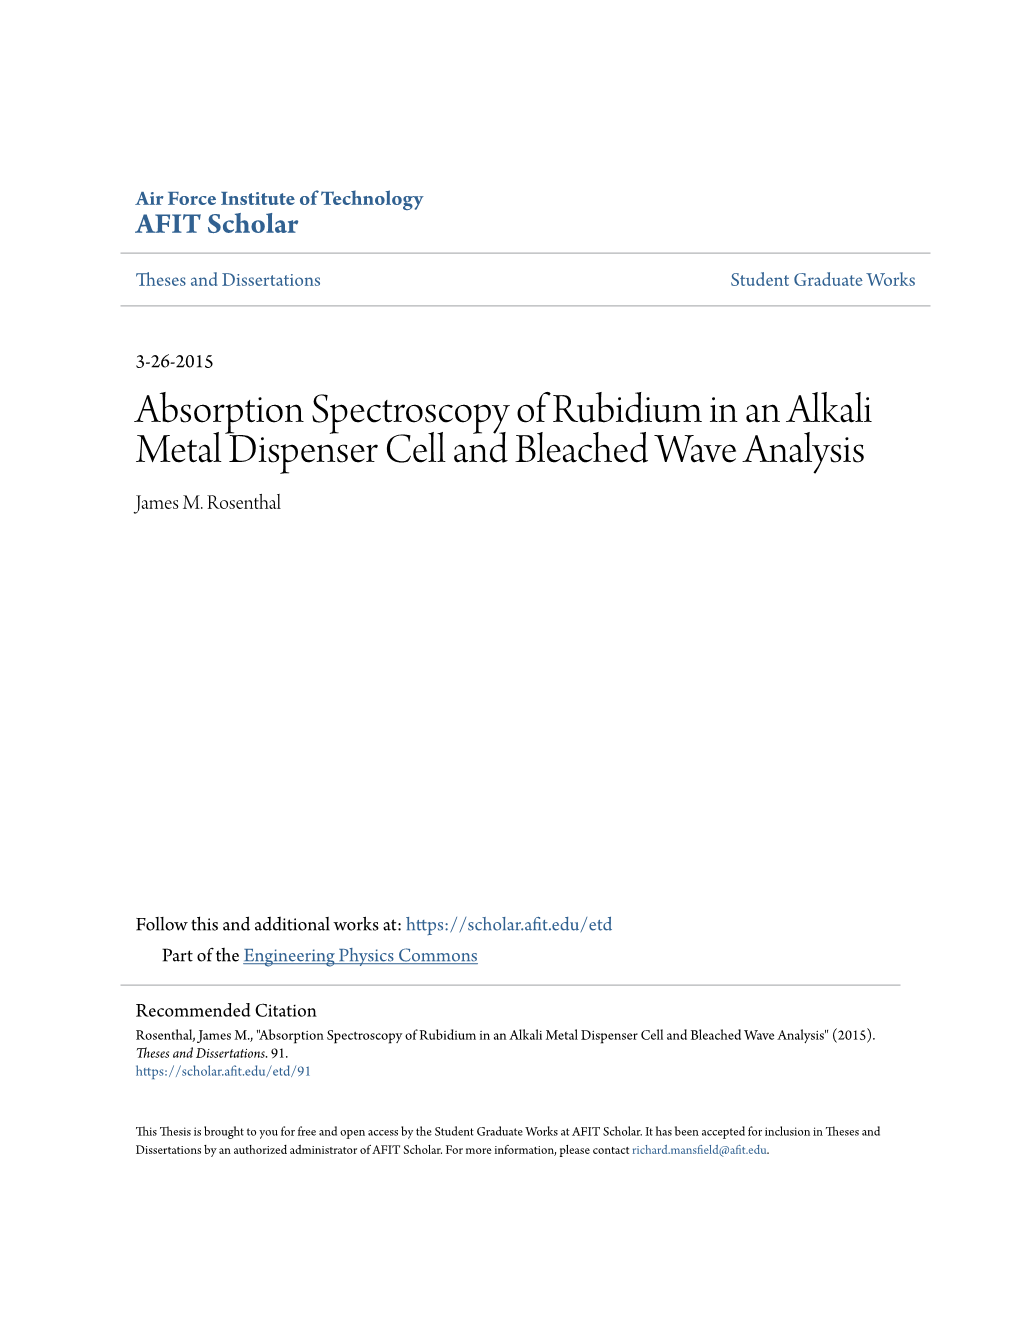 Absorption Spectroscopy of Rubidium in an Alkali Metal Dispenser Cell and Bleached Wave Analysis James M